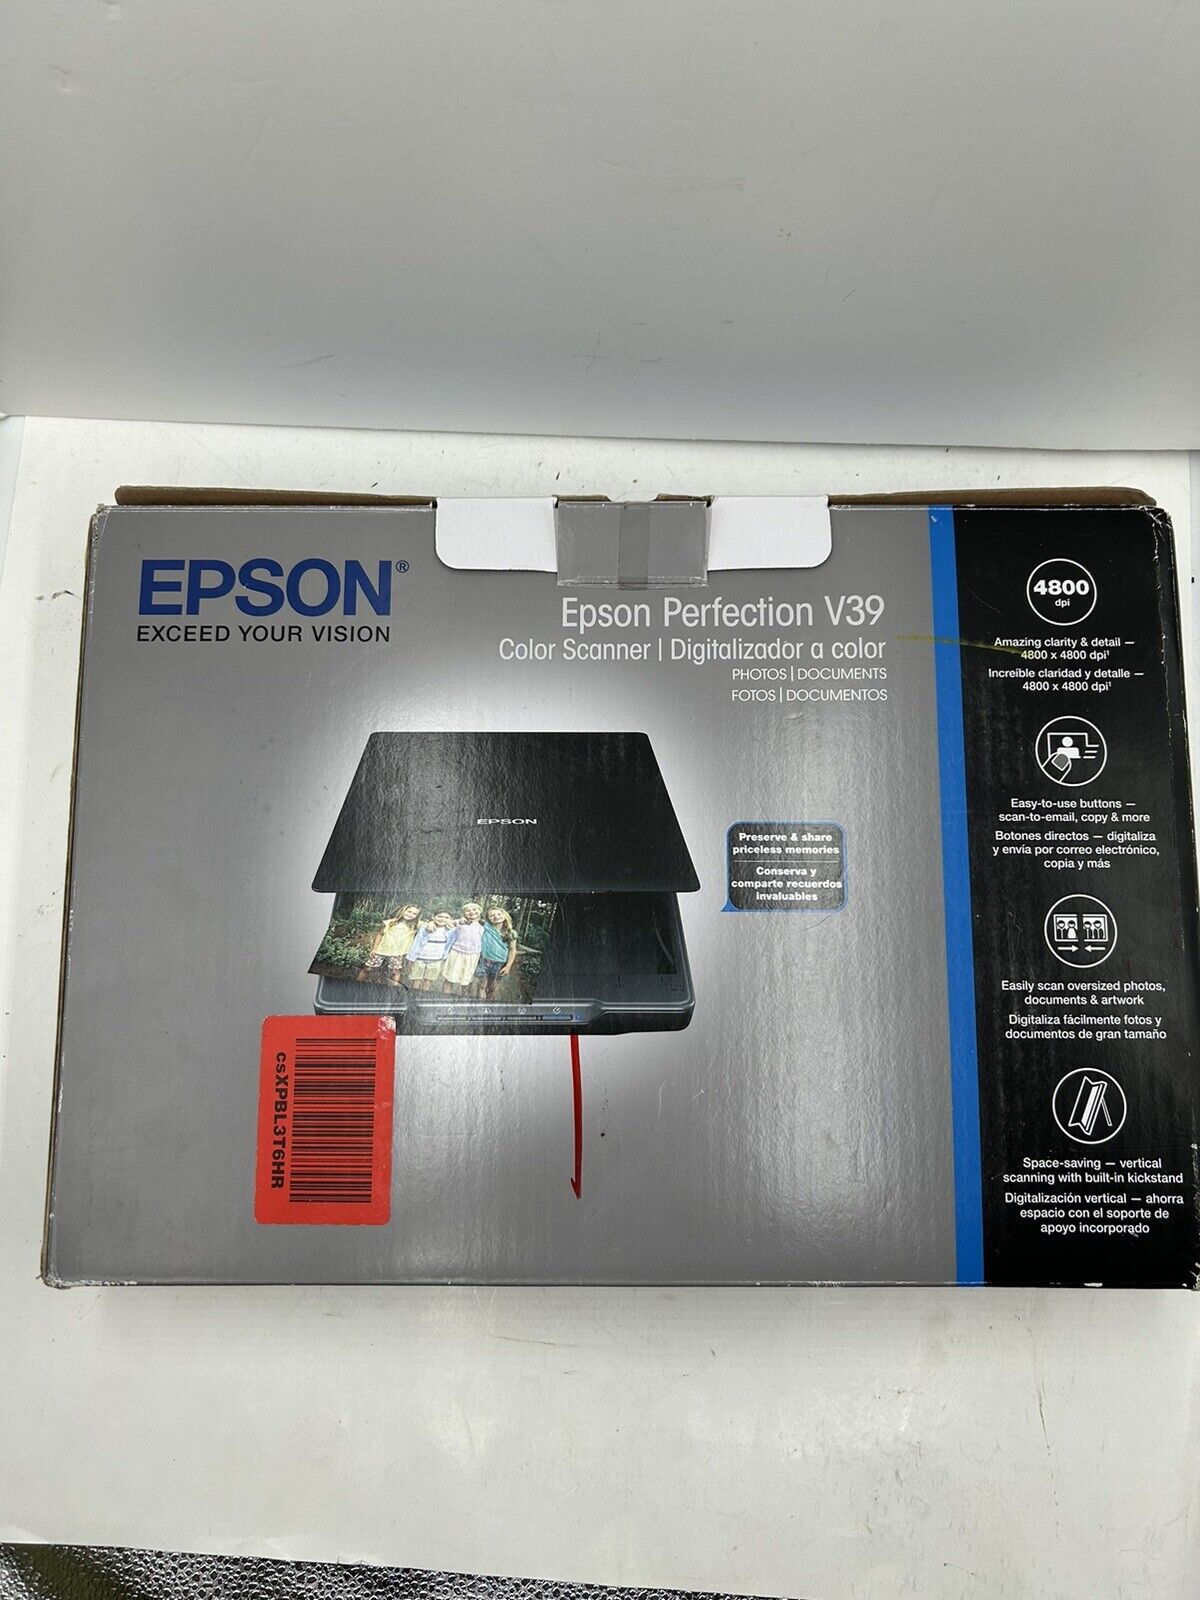 Epson Perfection V39 Flatbed Color Scanner with Original Box